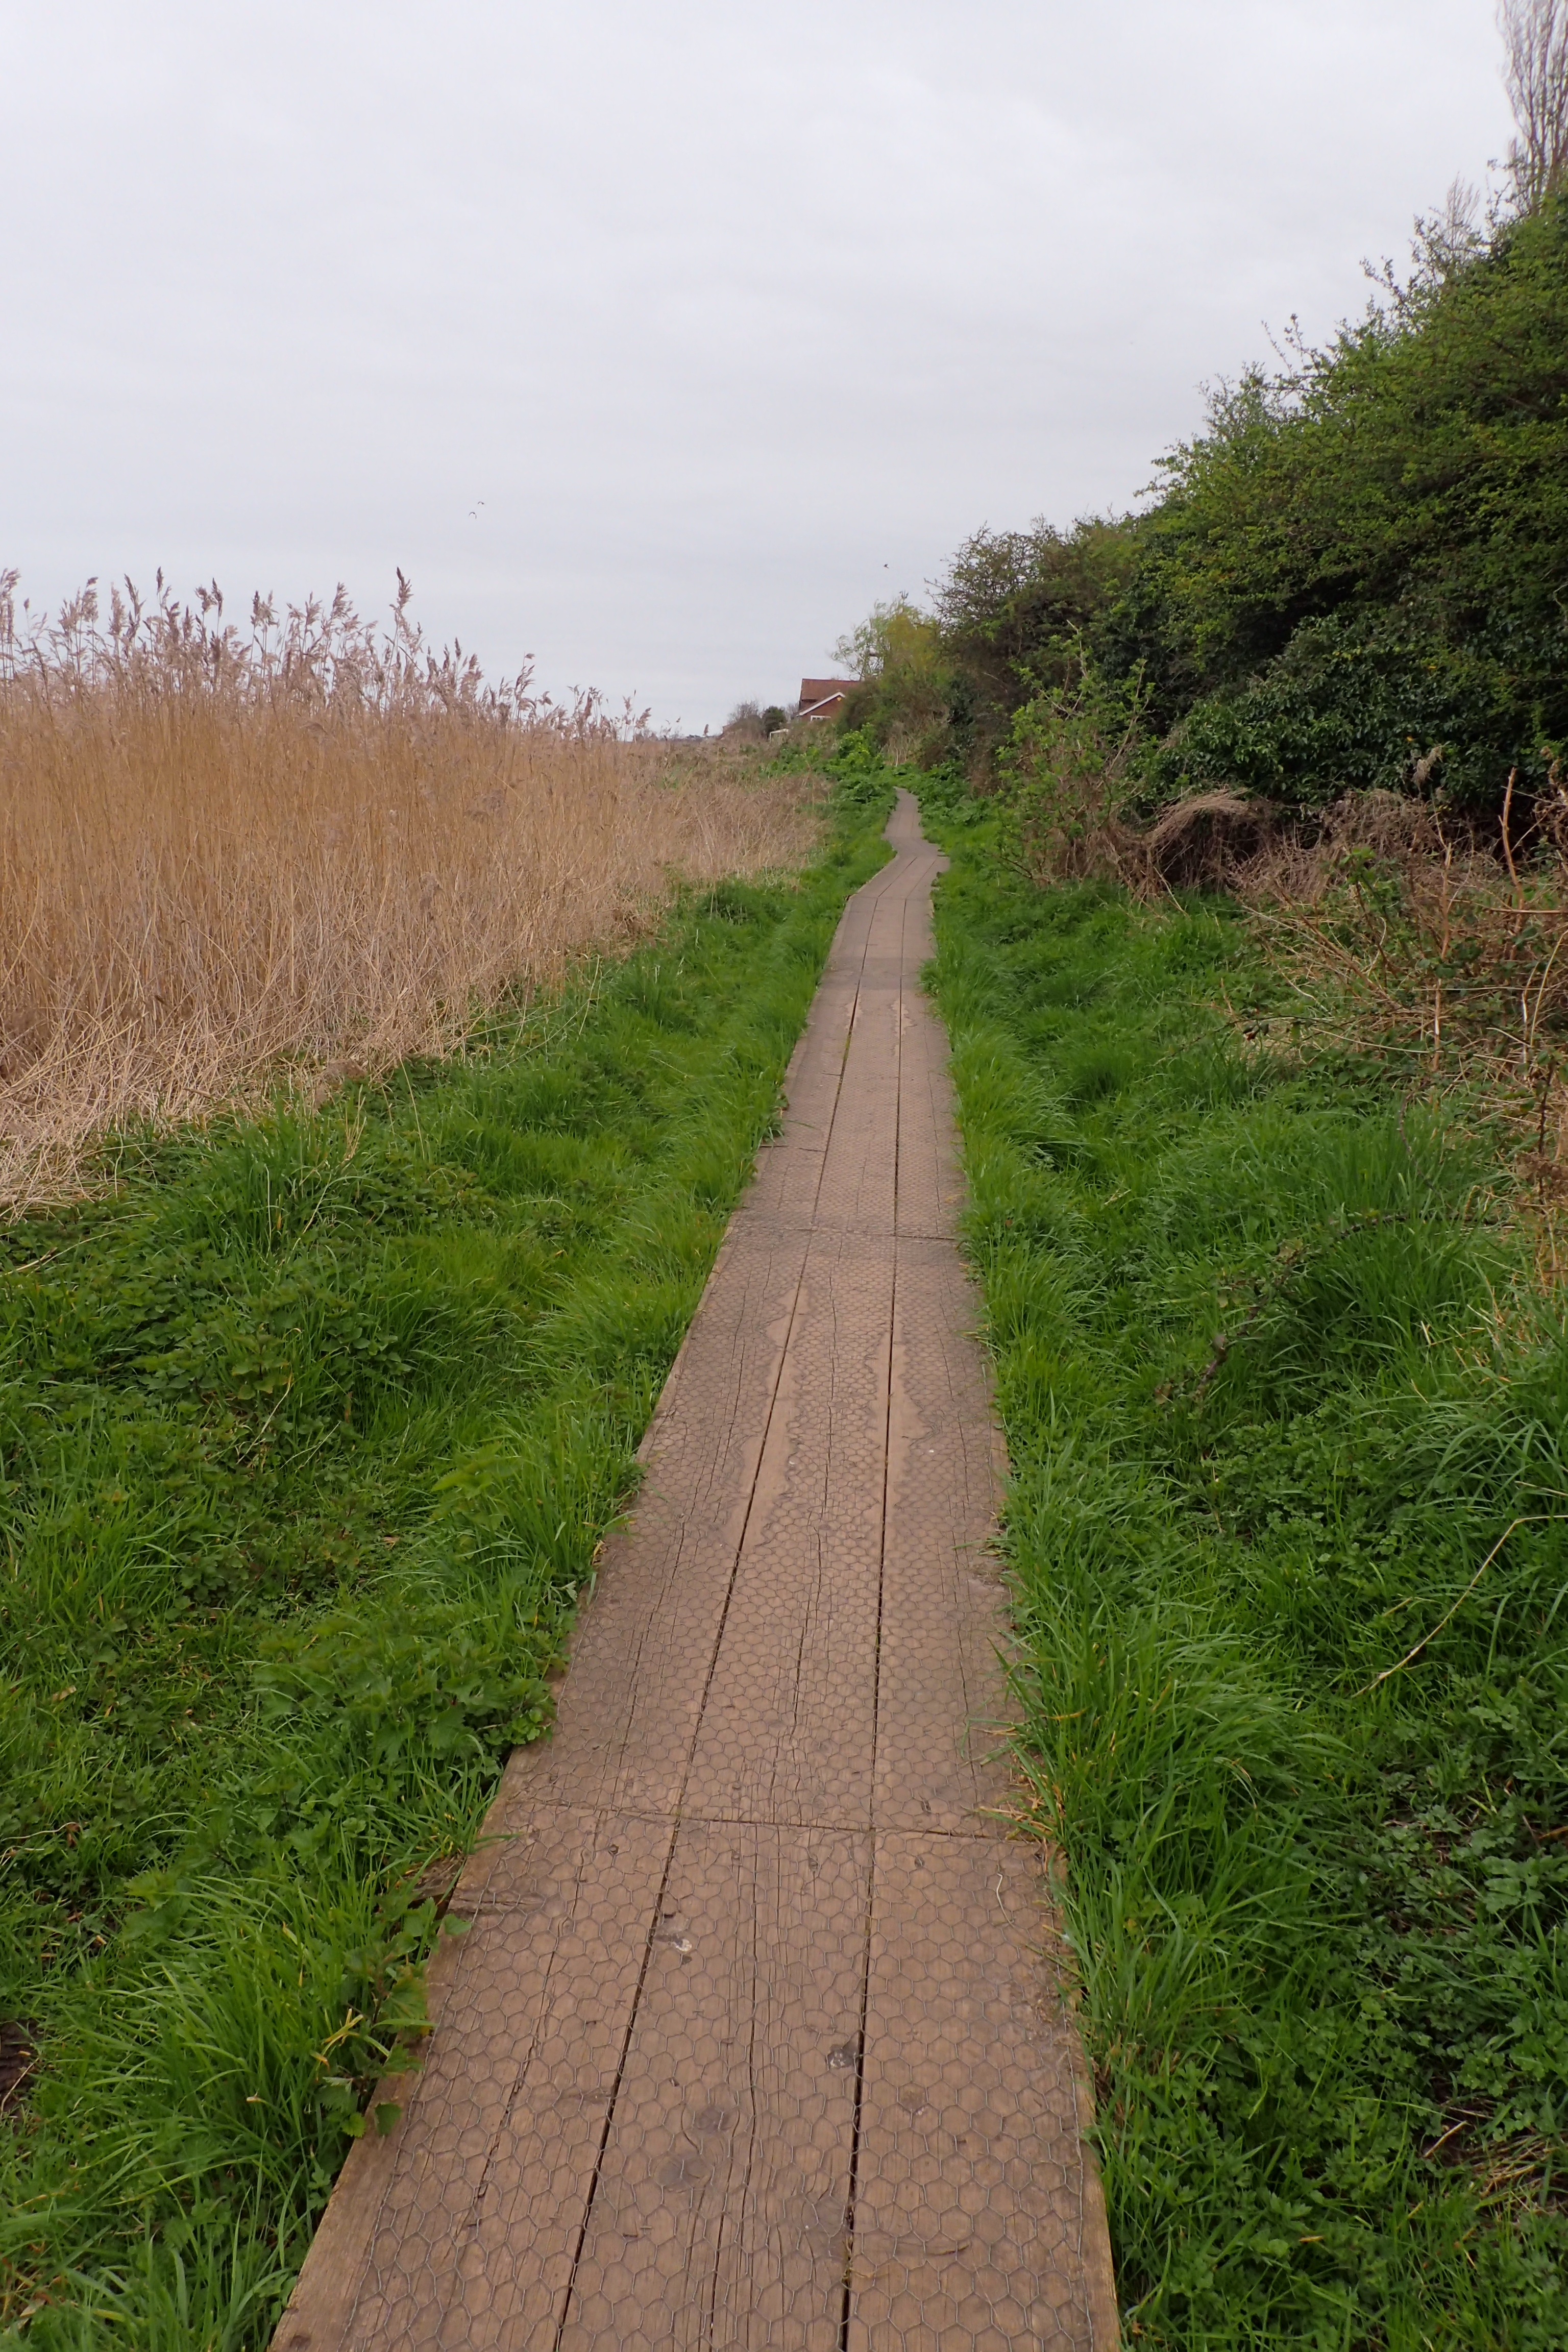 There were a couple of miles of board walks in all